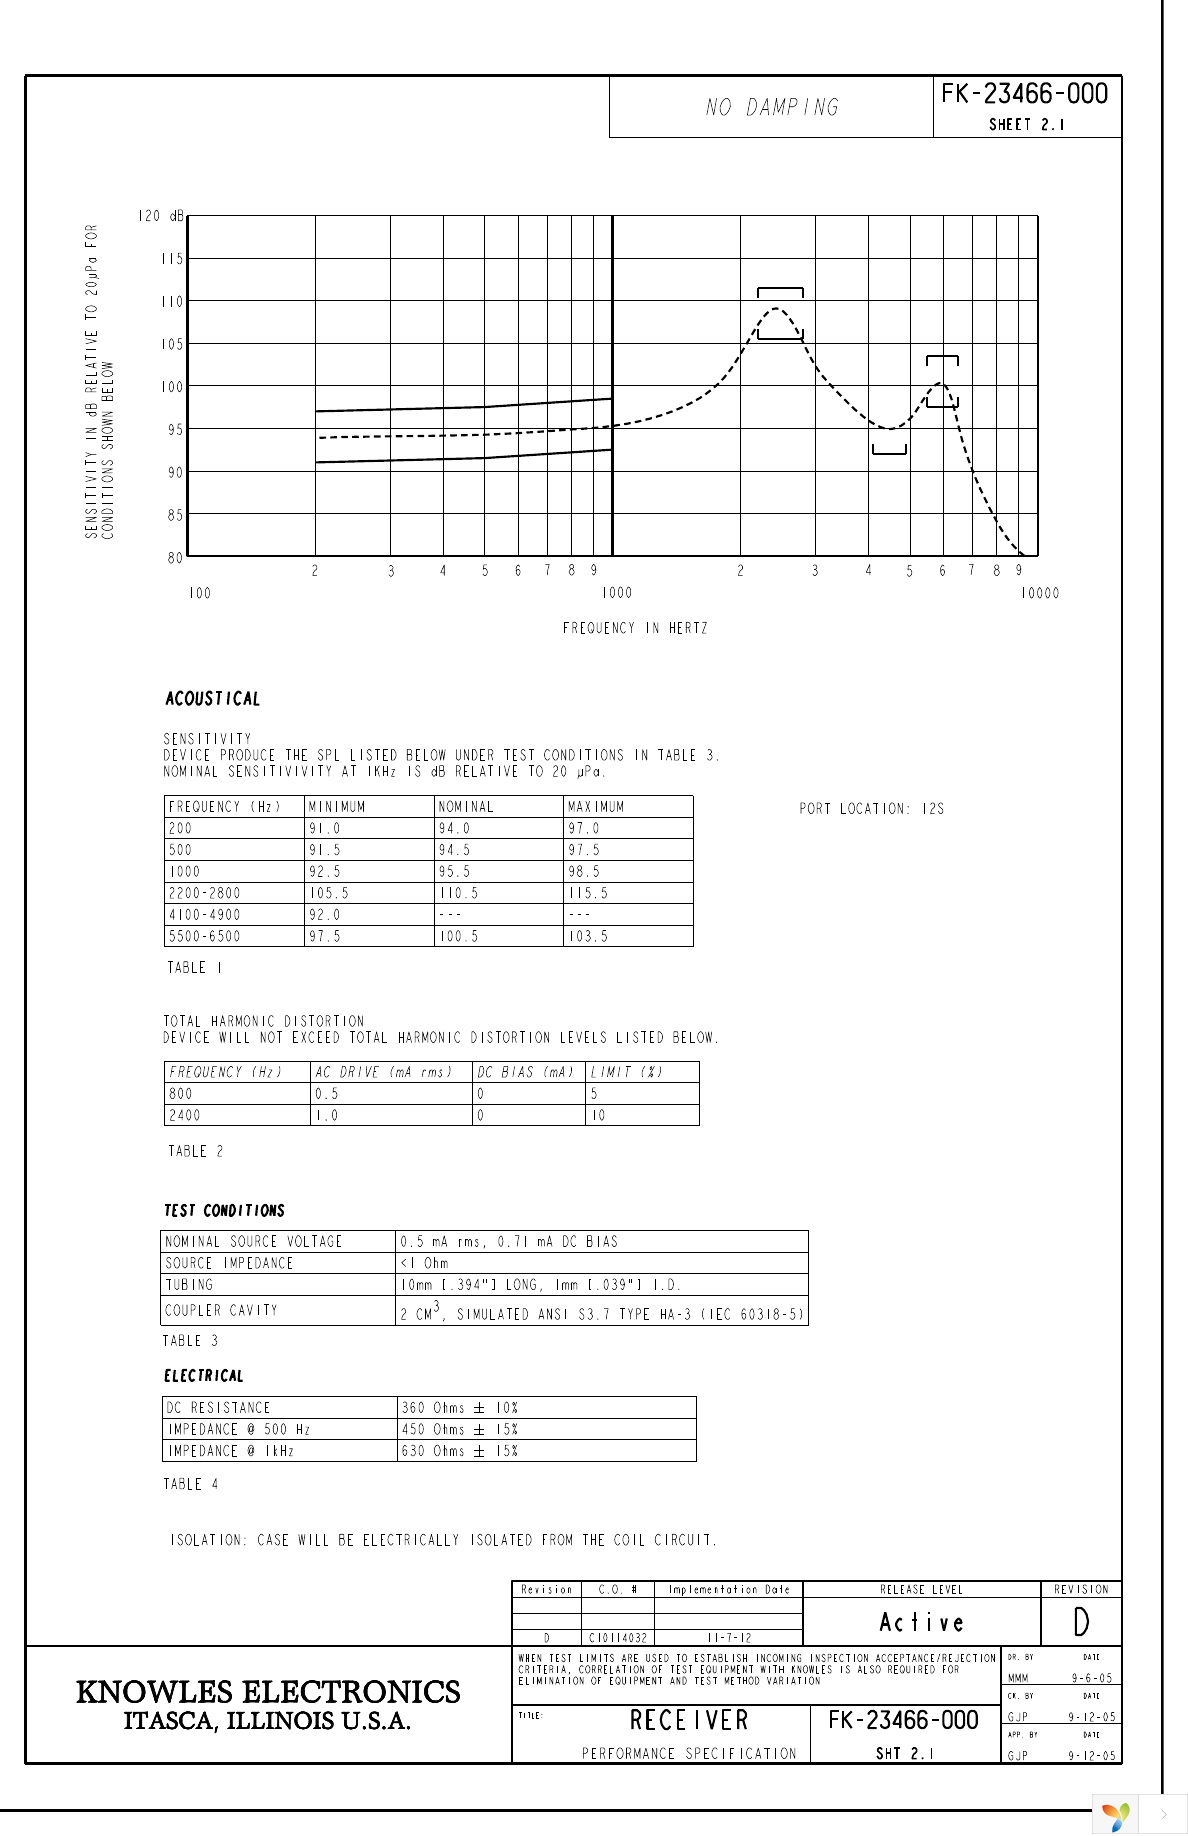 FK-23466-000 Page 2